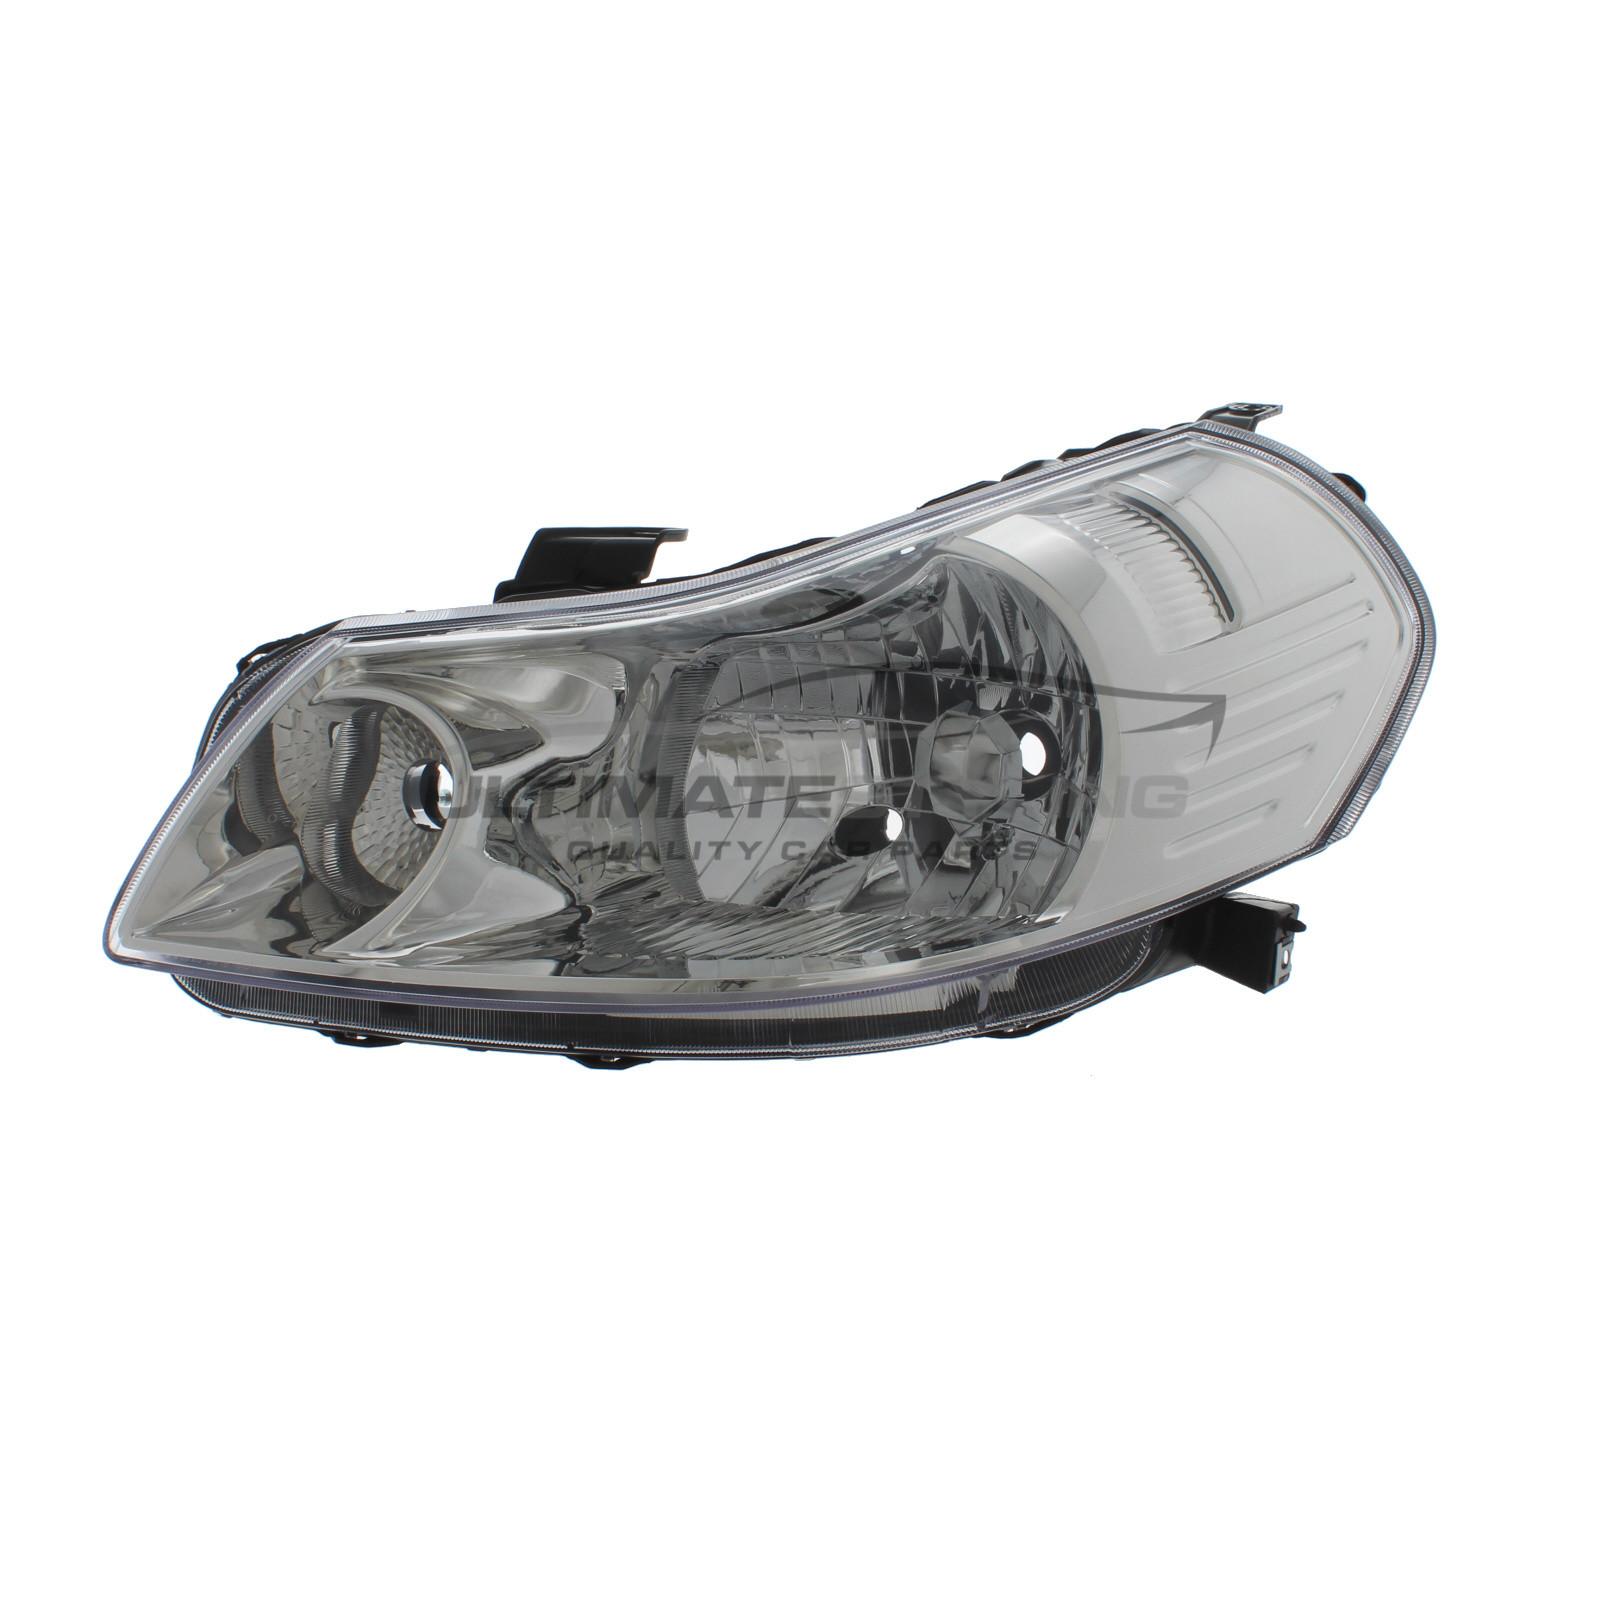 Suzuki SX4 2006-2015 Halogen, Electric Without Motor, Chrome Headlight / Headlamp Including Clear Indicator Passengers Side (LH)